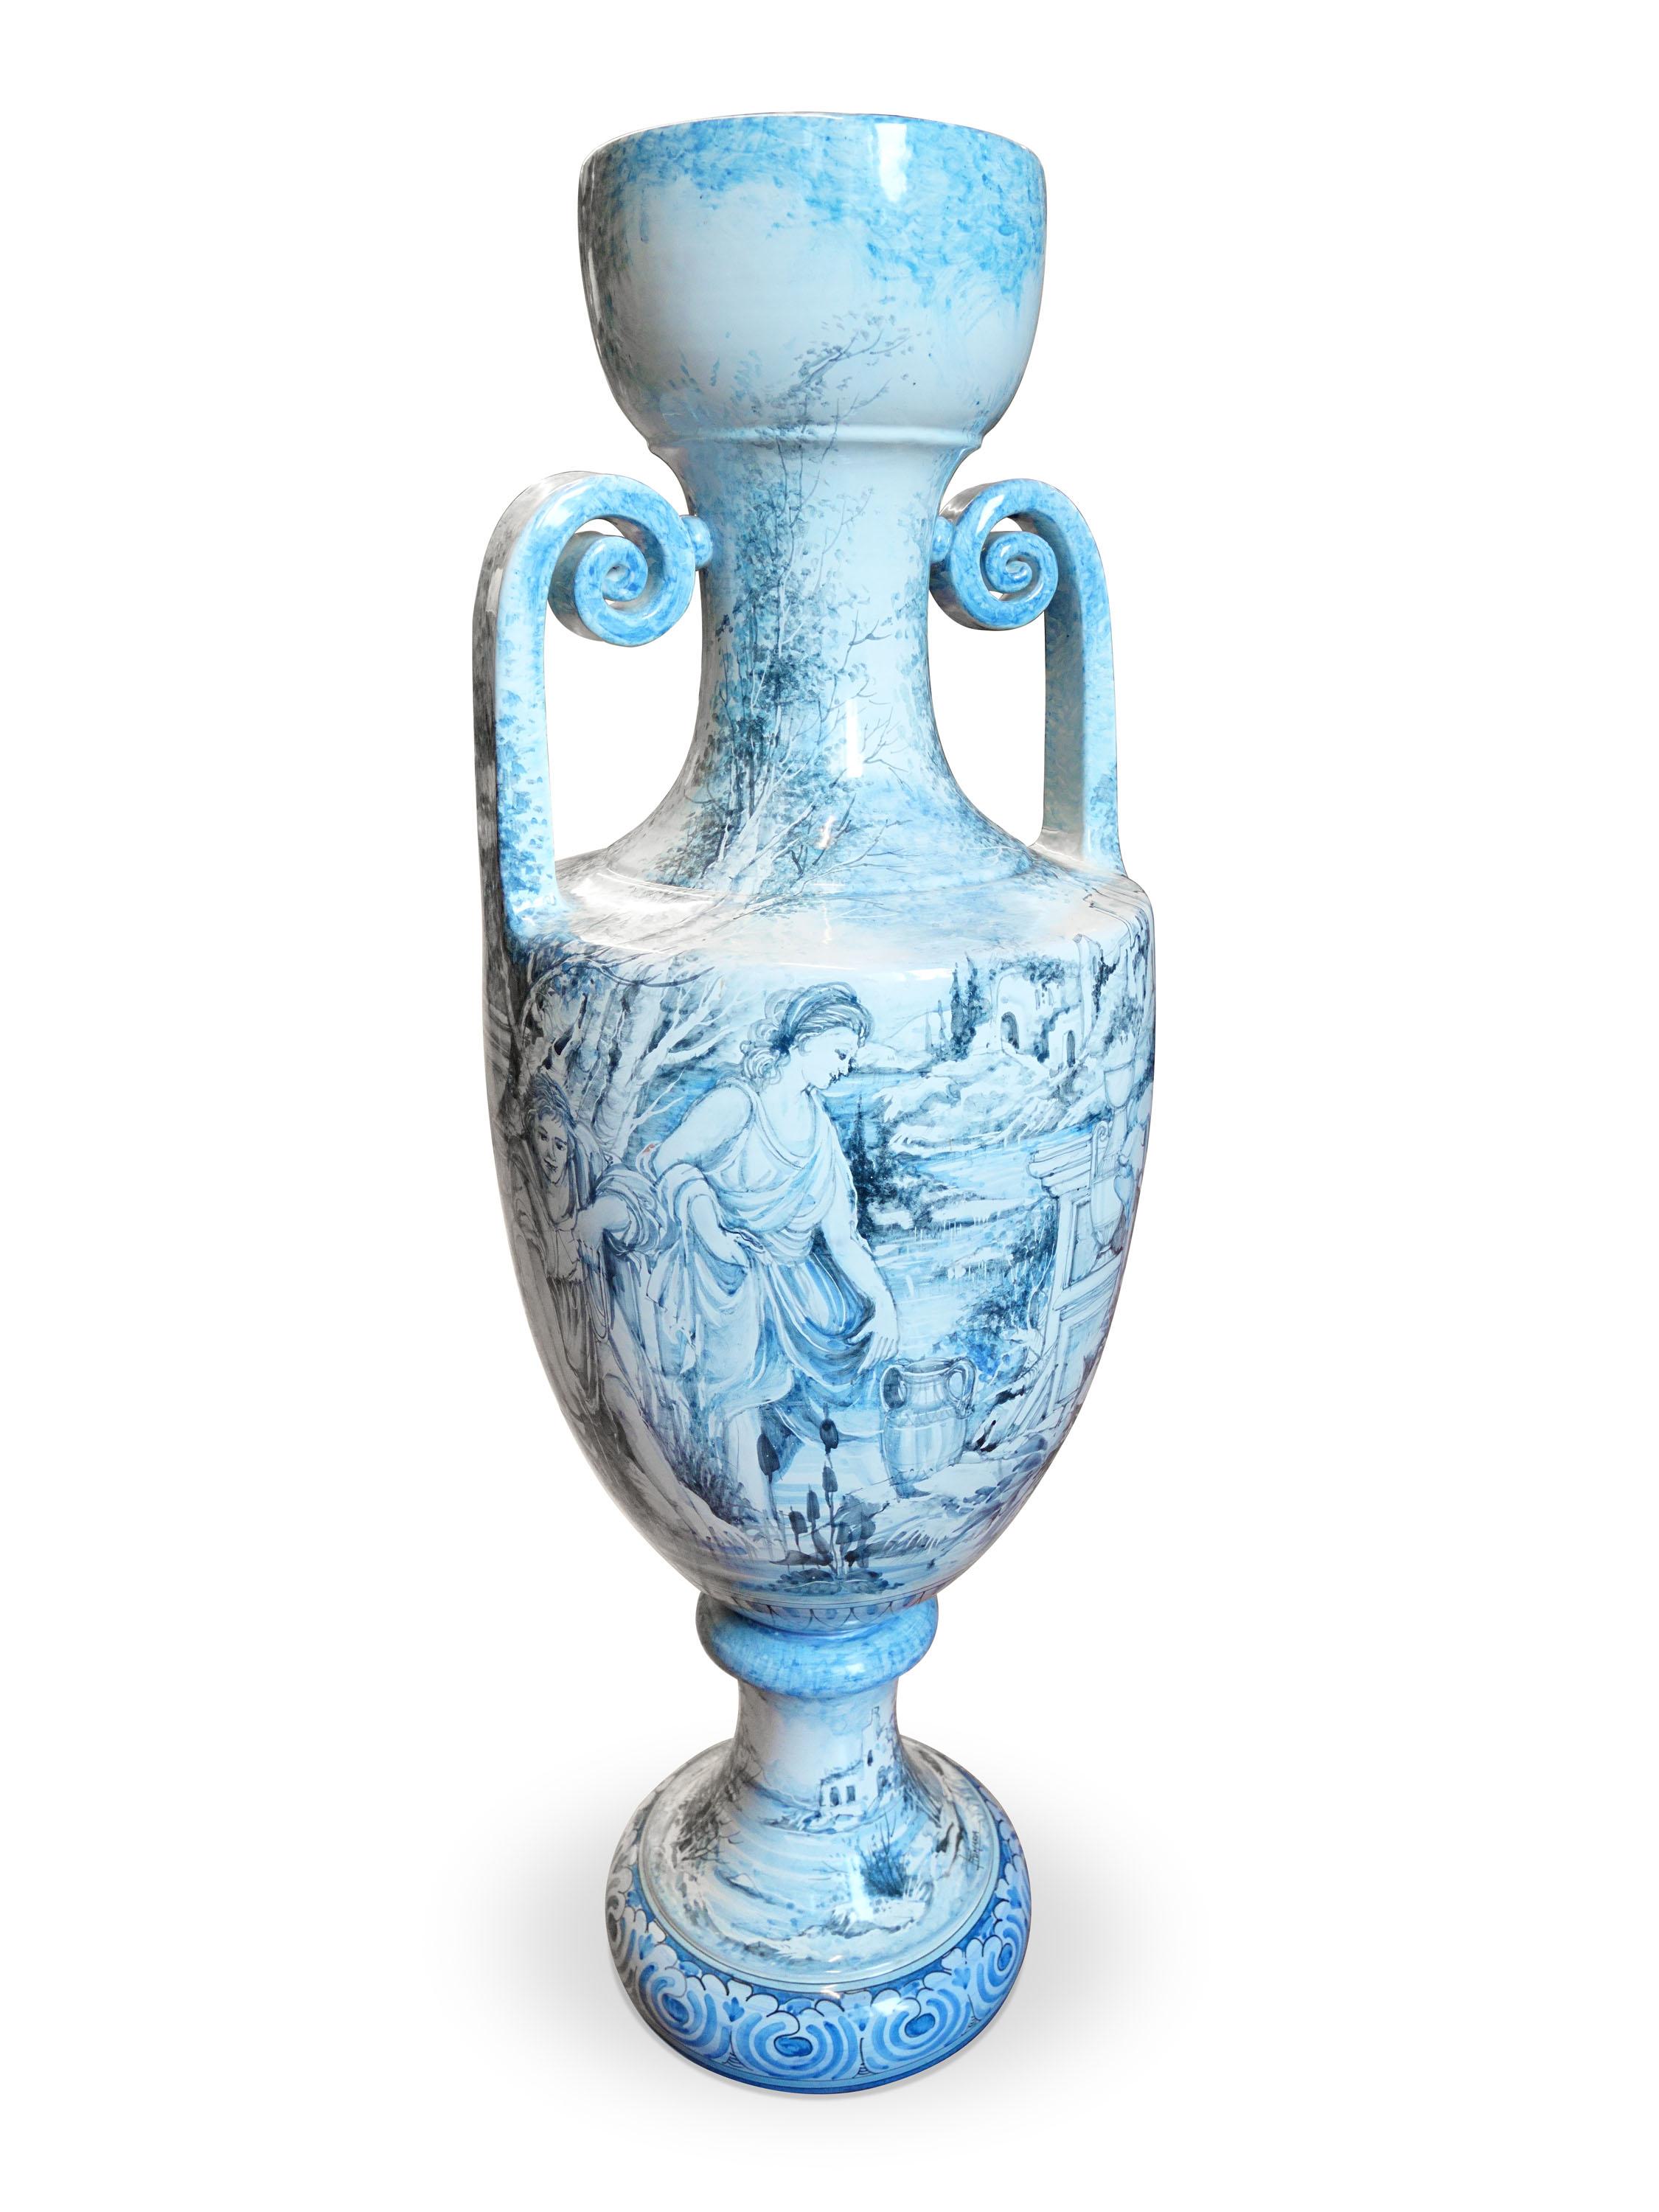 Light Blue and Gray Ceramic Majolica Amphora Hand Painted Francois Boucher Italy In Excellent Condition For Sale In Recanati, IT